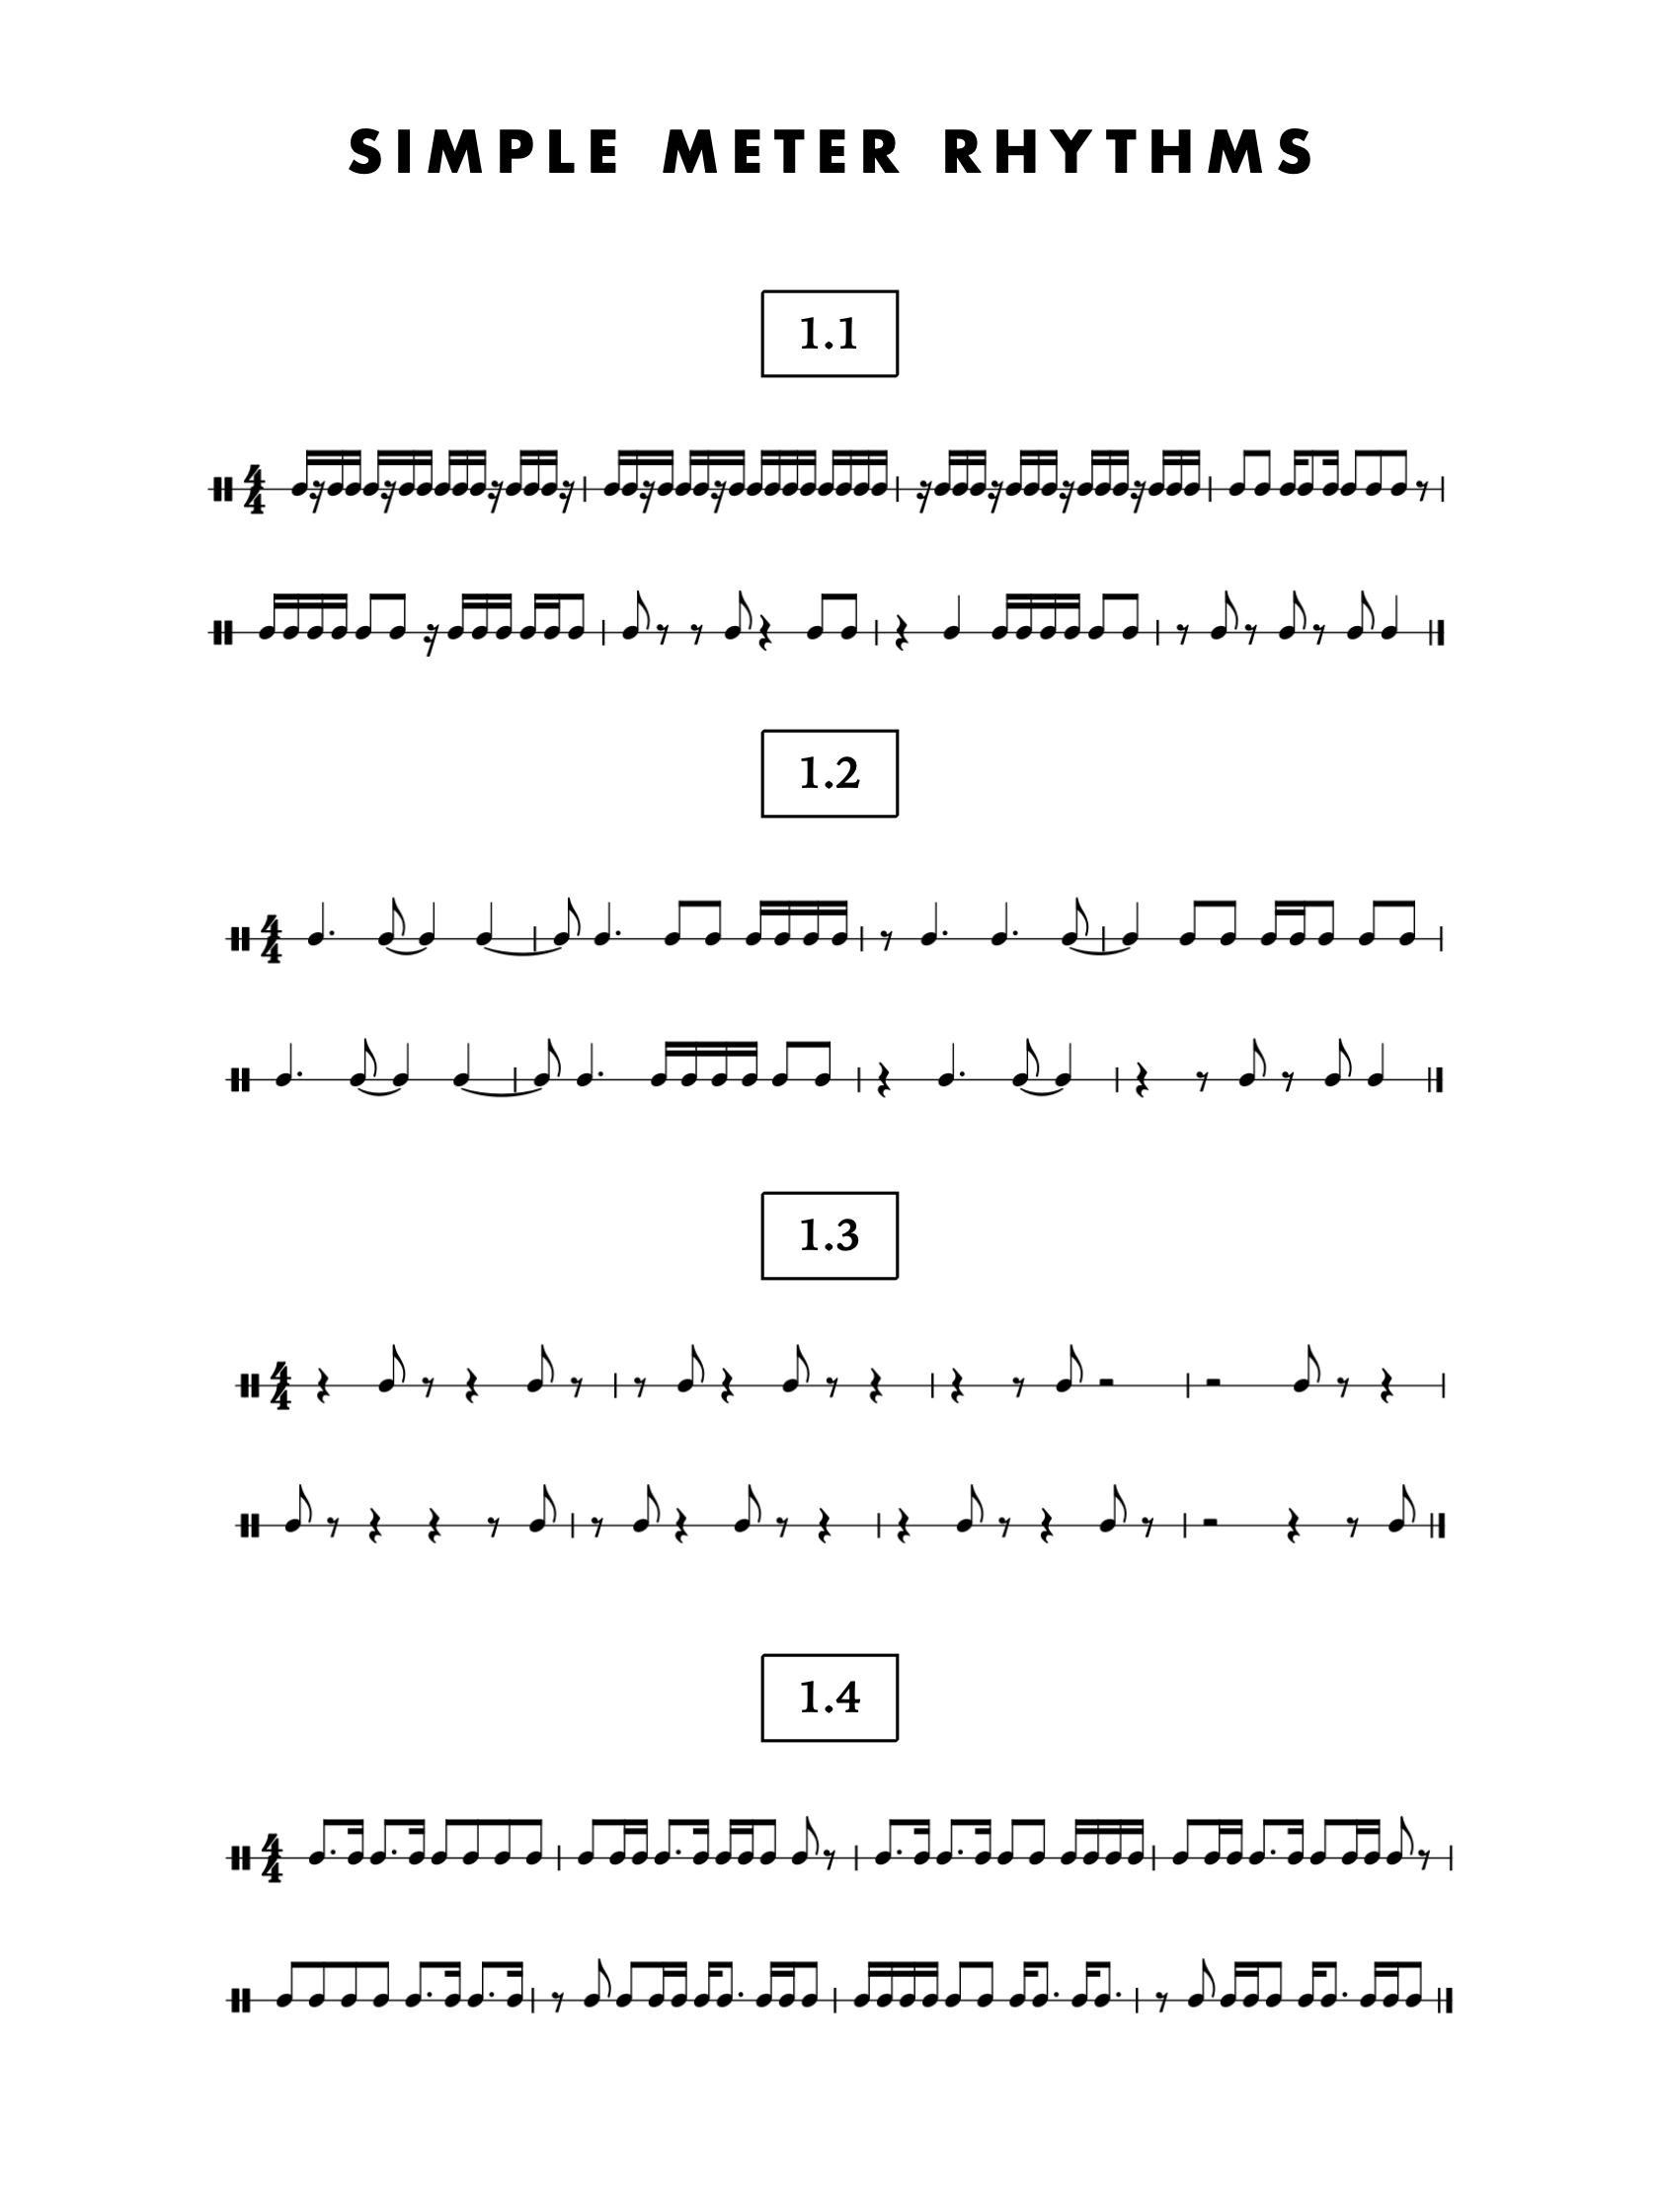 A page of music notation focusing on reading rhythms.